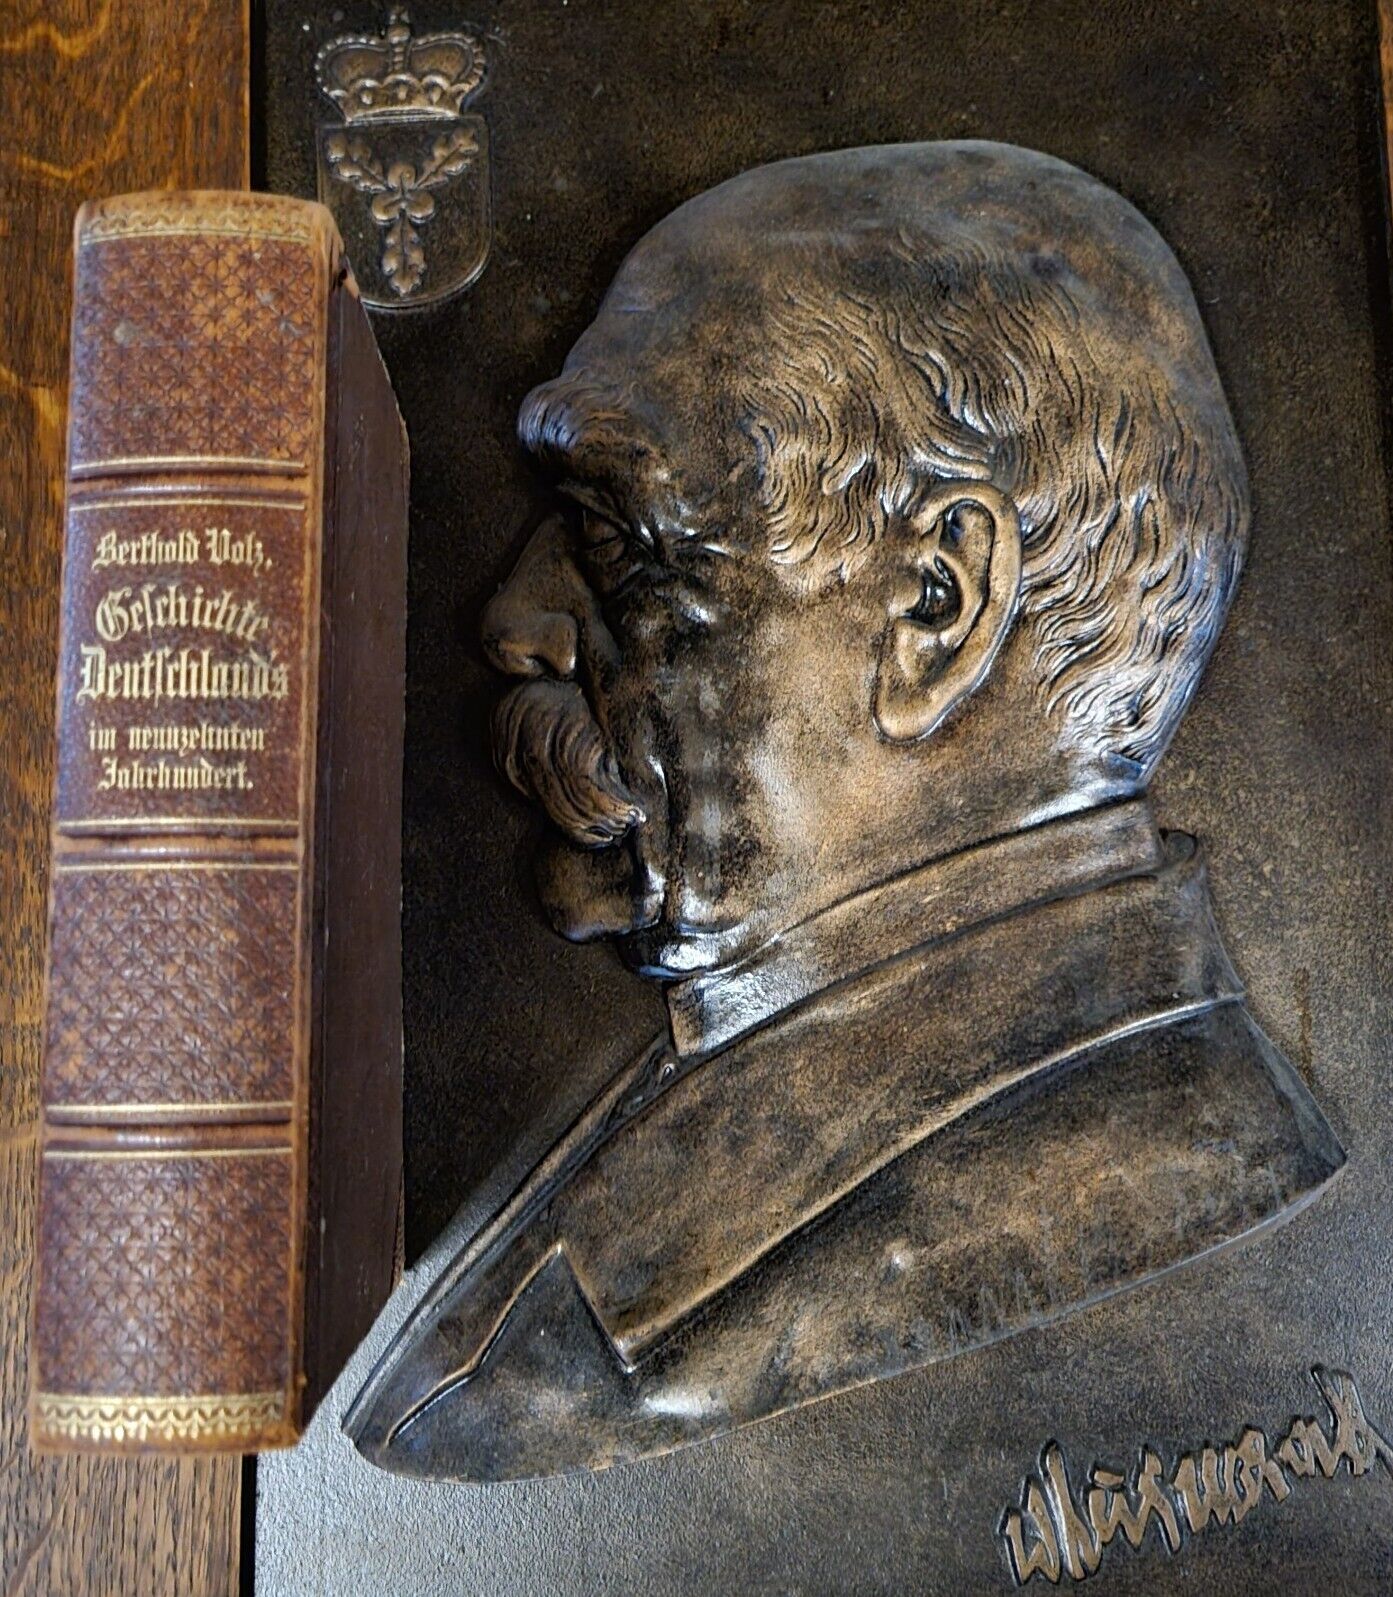 Iron Photo Of Chancellor To Germany And Matching Book